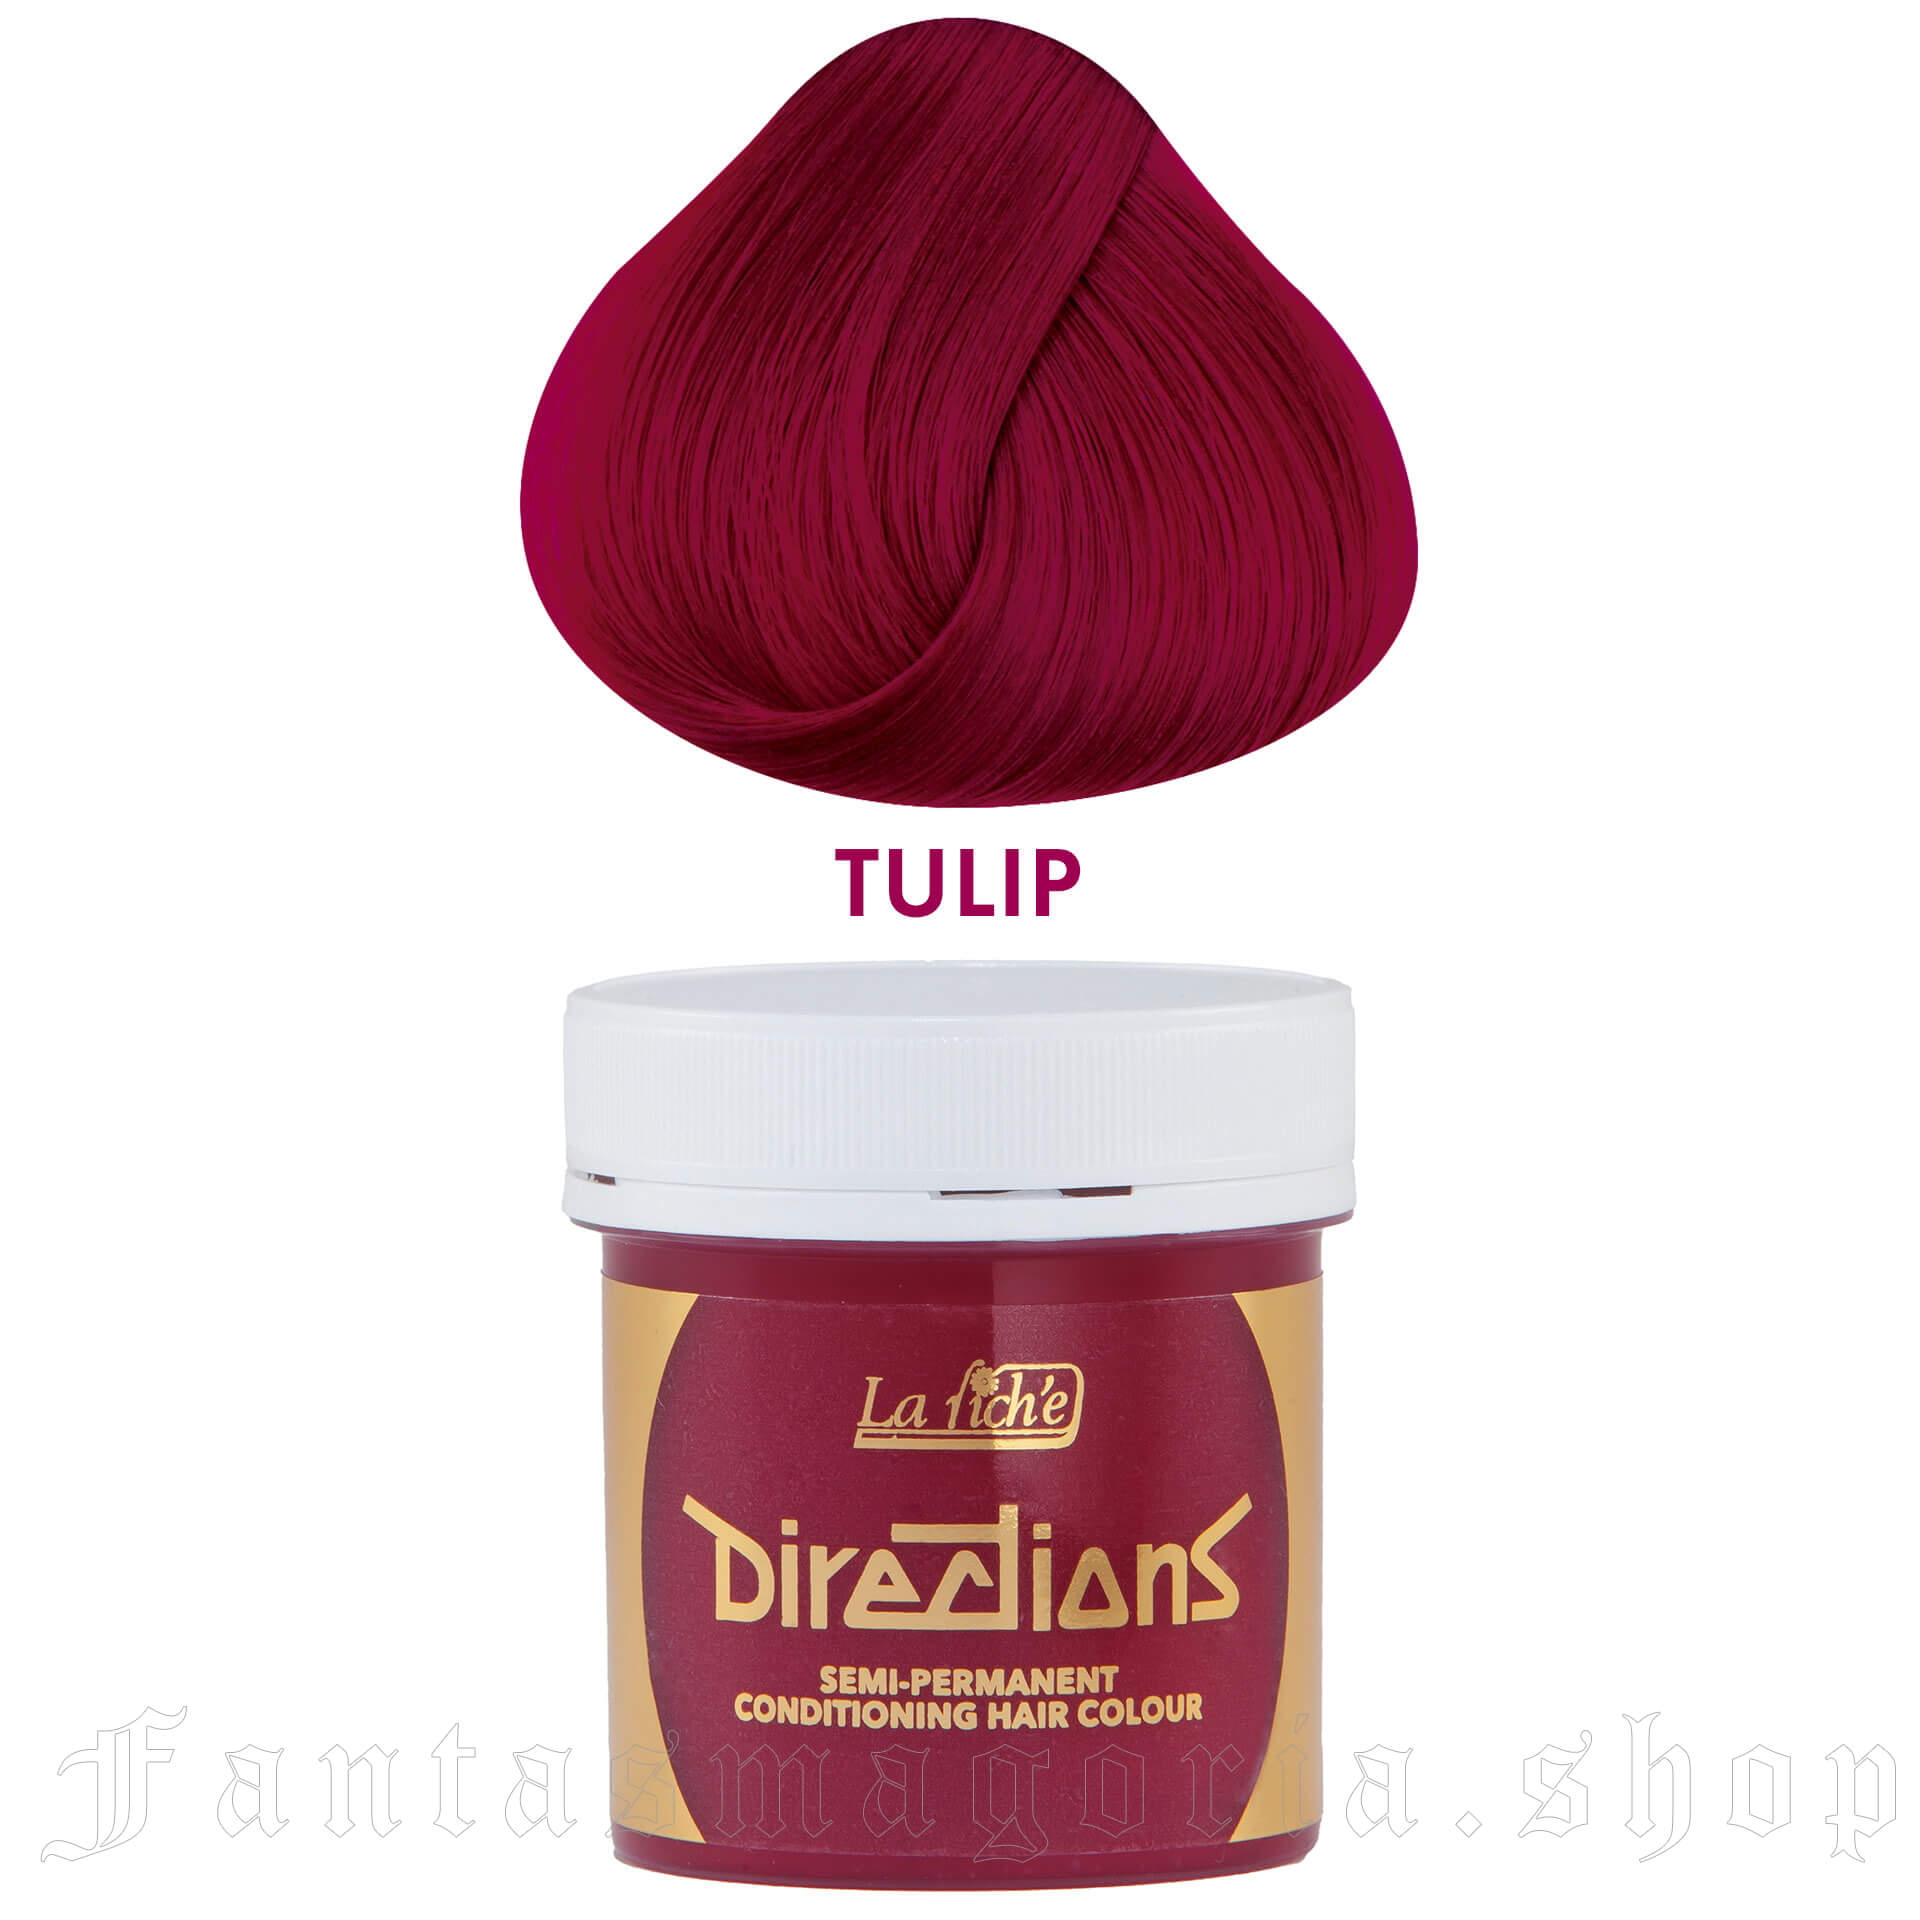 Tulip Hair Coloring Balsam - Directions - DIRECTIONS/TULIP 1